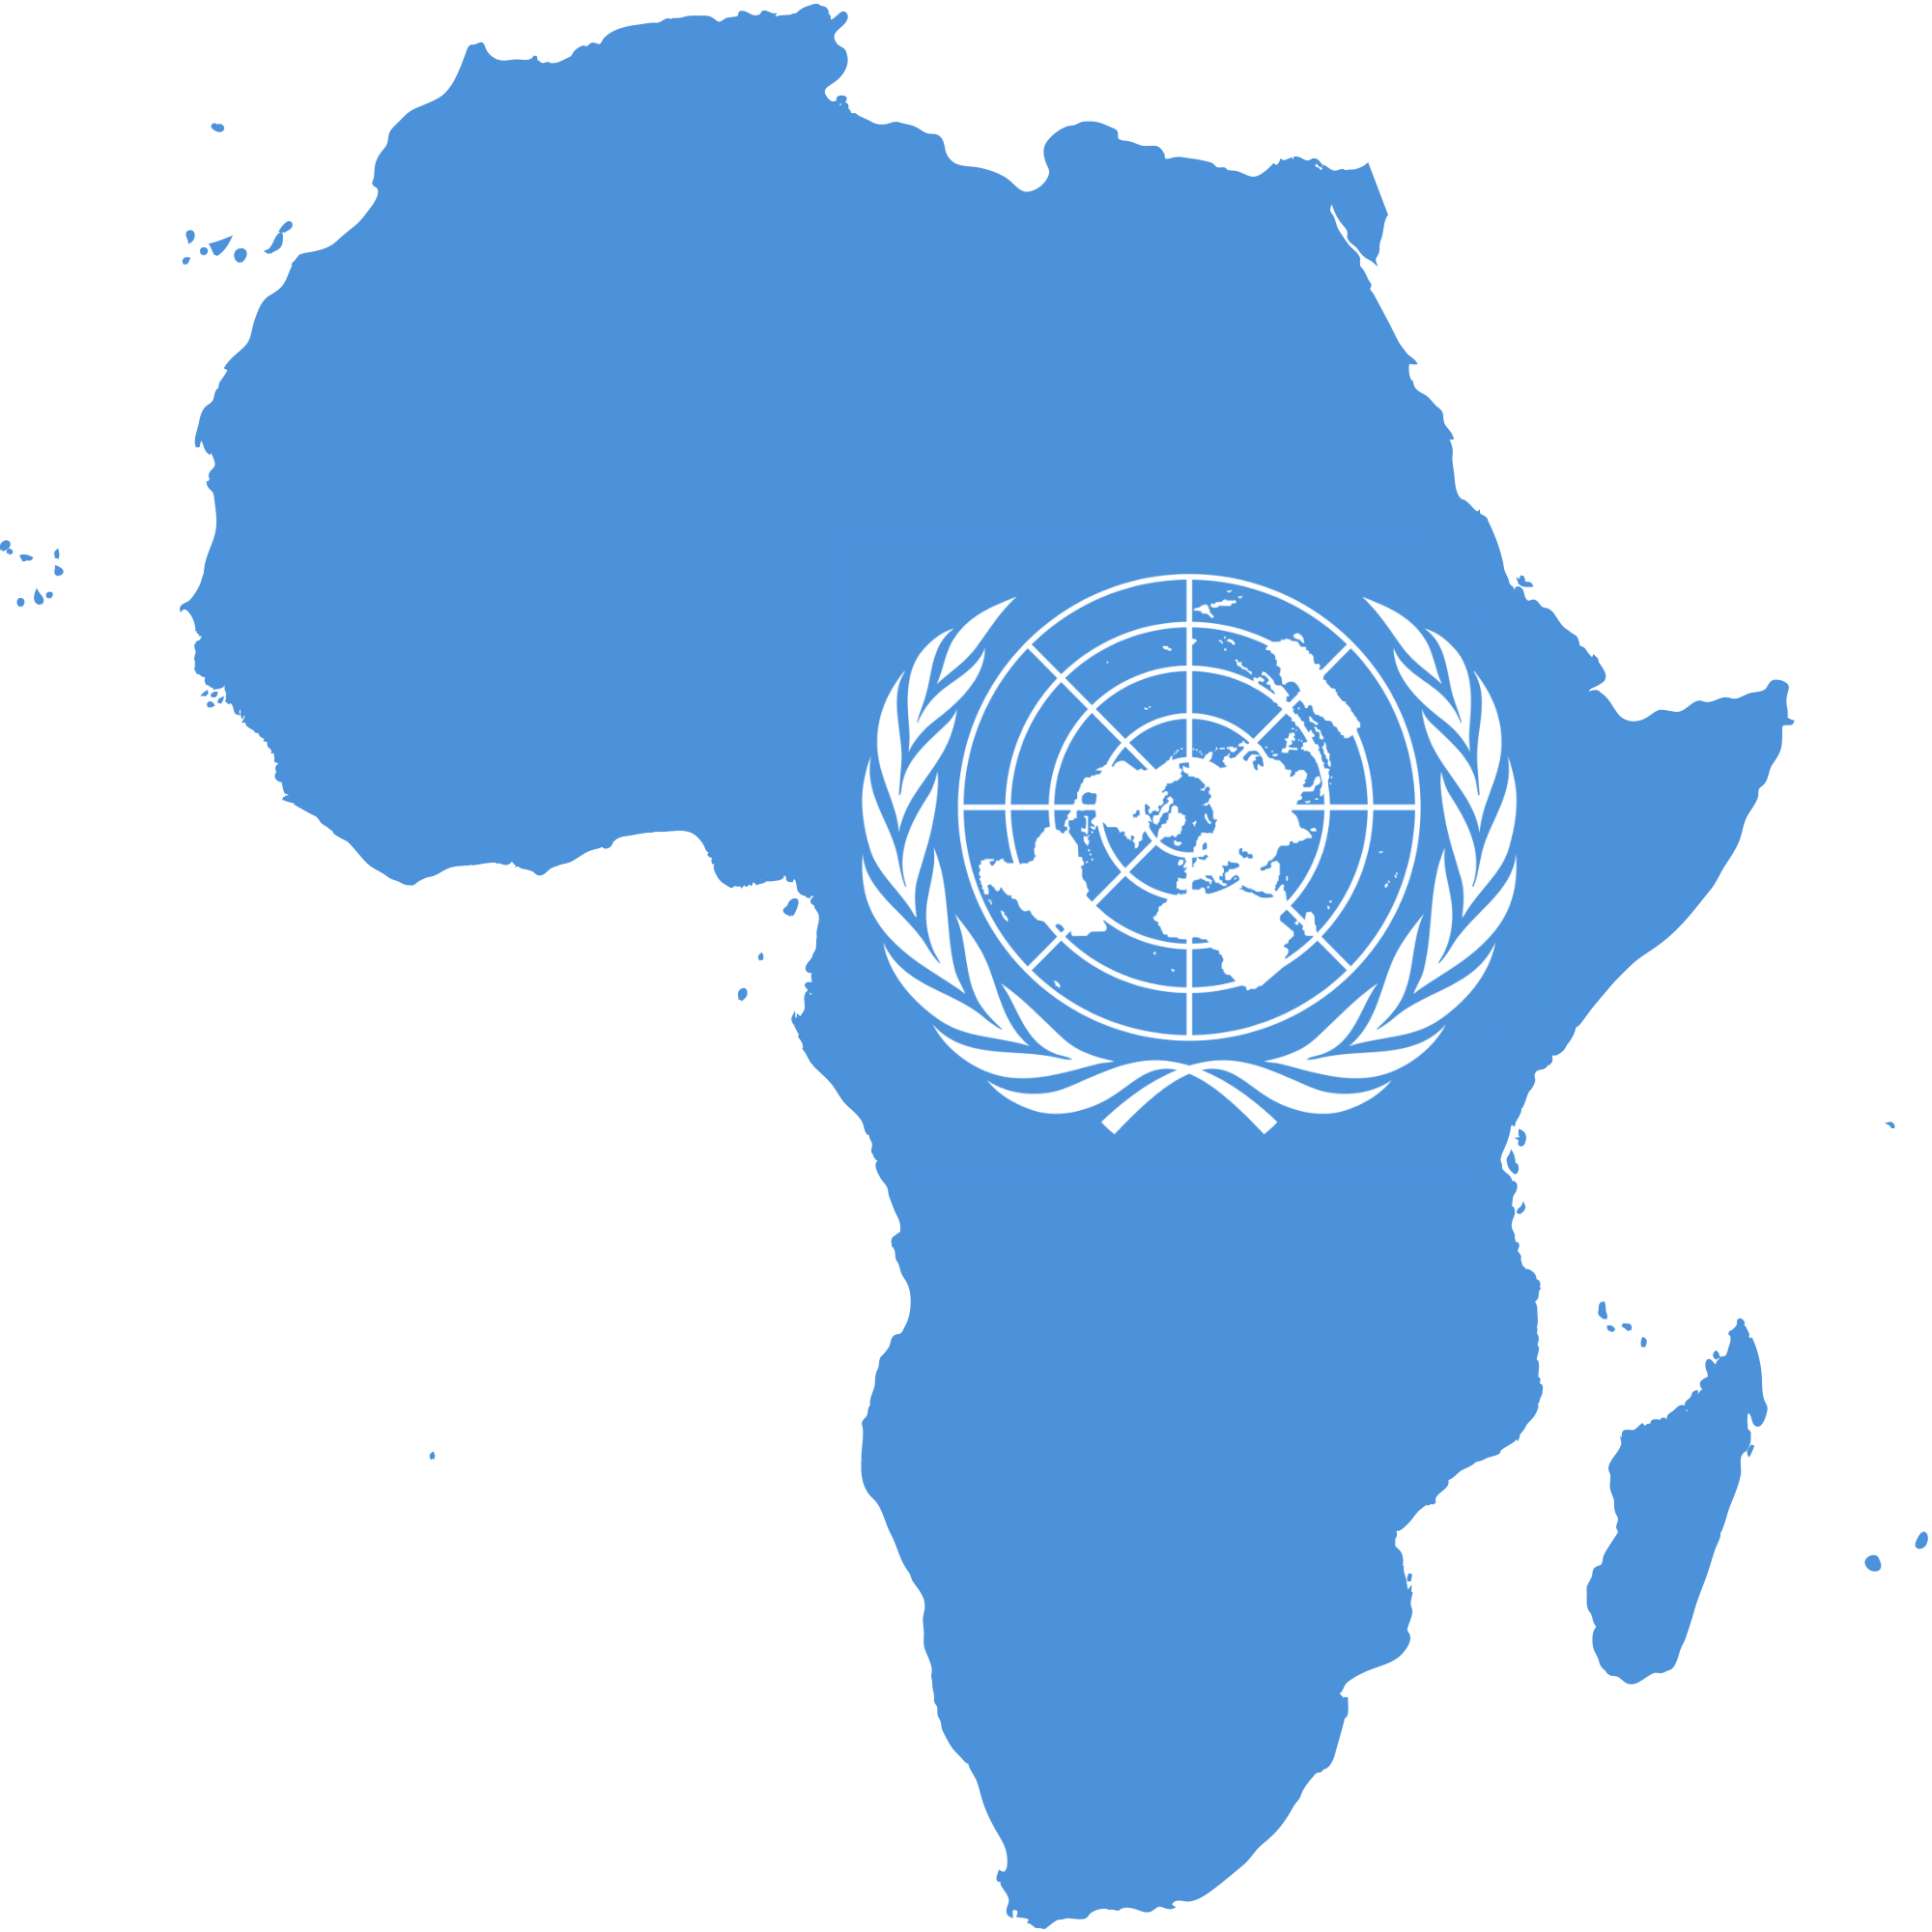 Map United Nations Logo - File:Flag map of Africa (United Nations).png - Wikimedia Commons